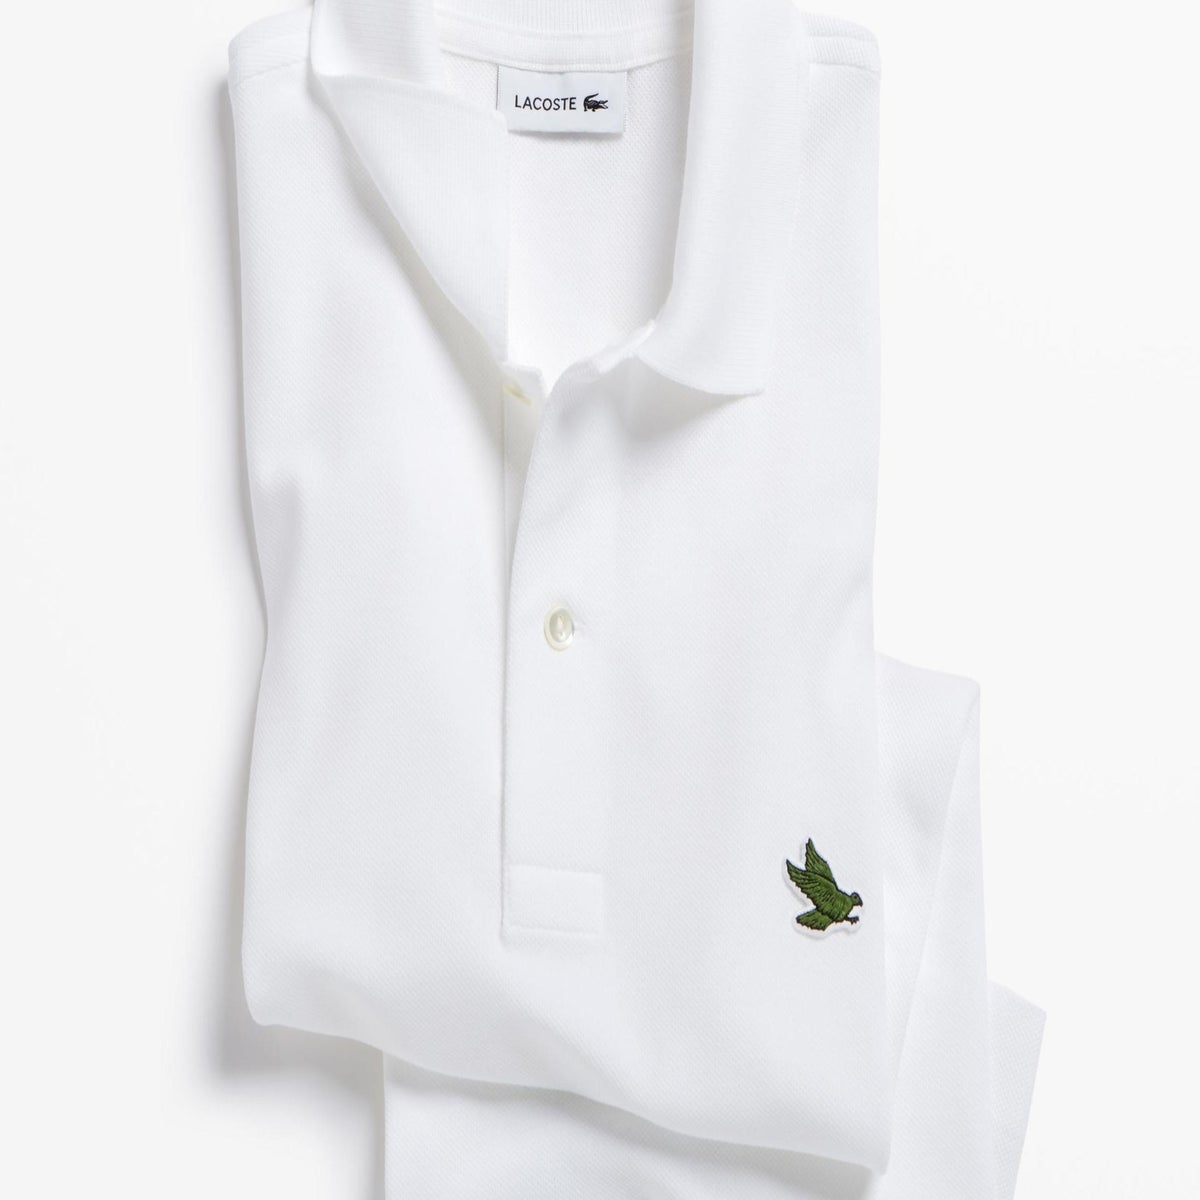 Lacoste replaces iconic logo with endangered as part conservation campaign | The Independent | The Independent